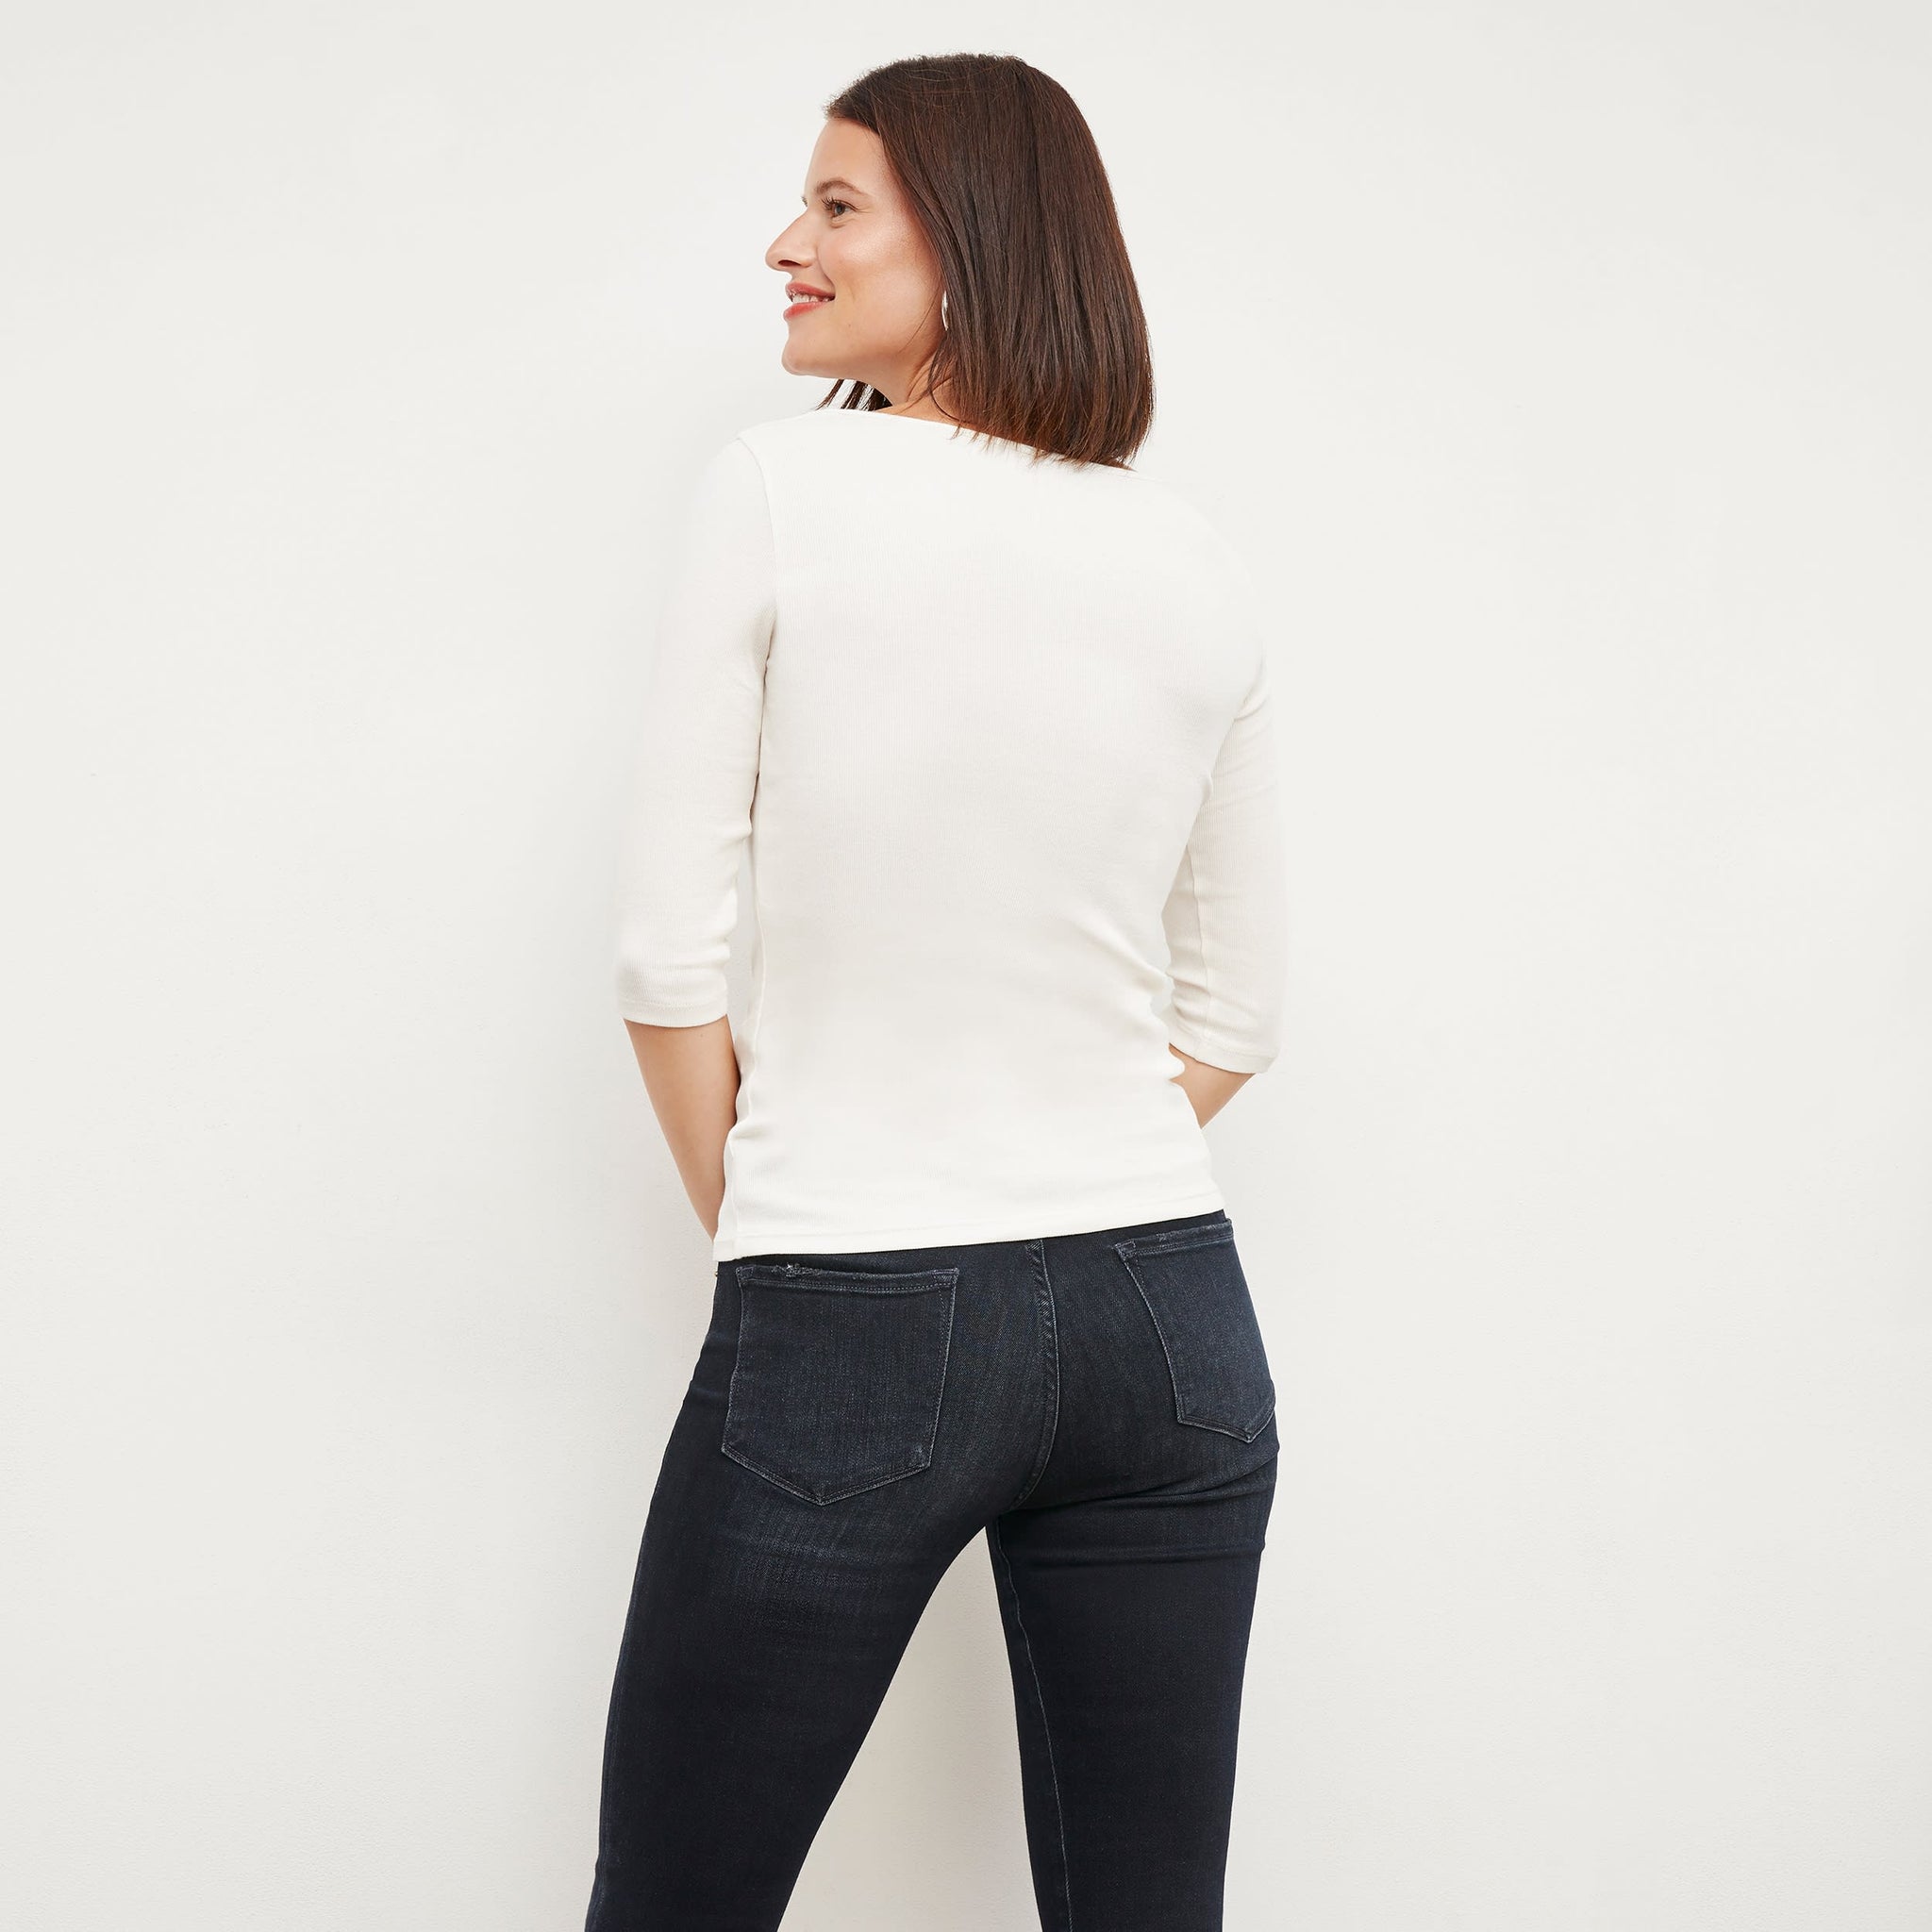 Back image of a woman wearing the Soyoung top in Ivory